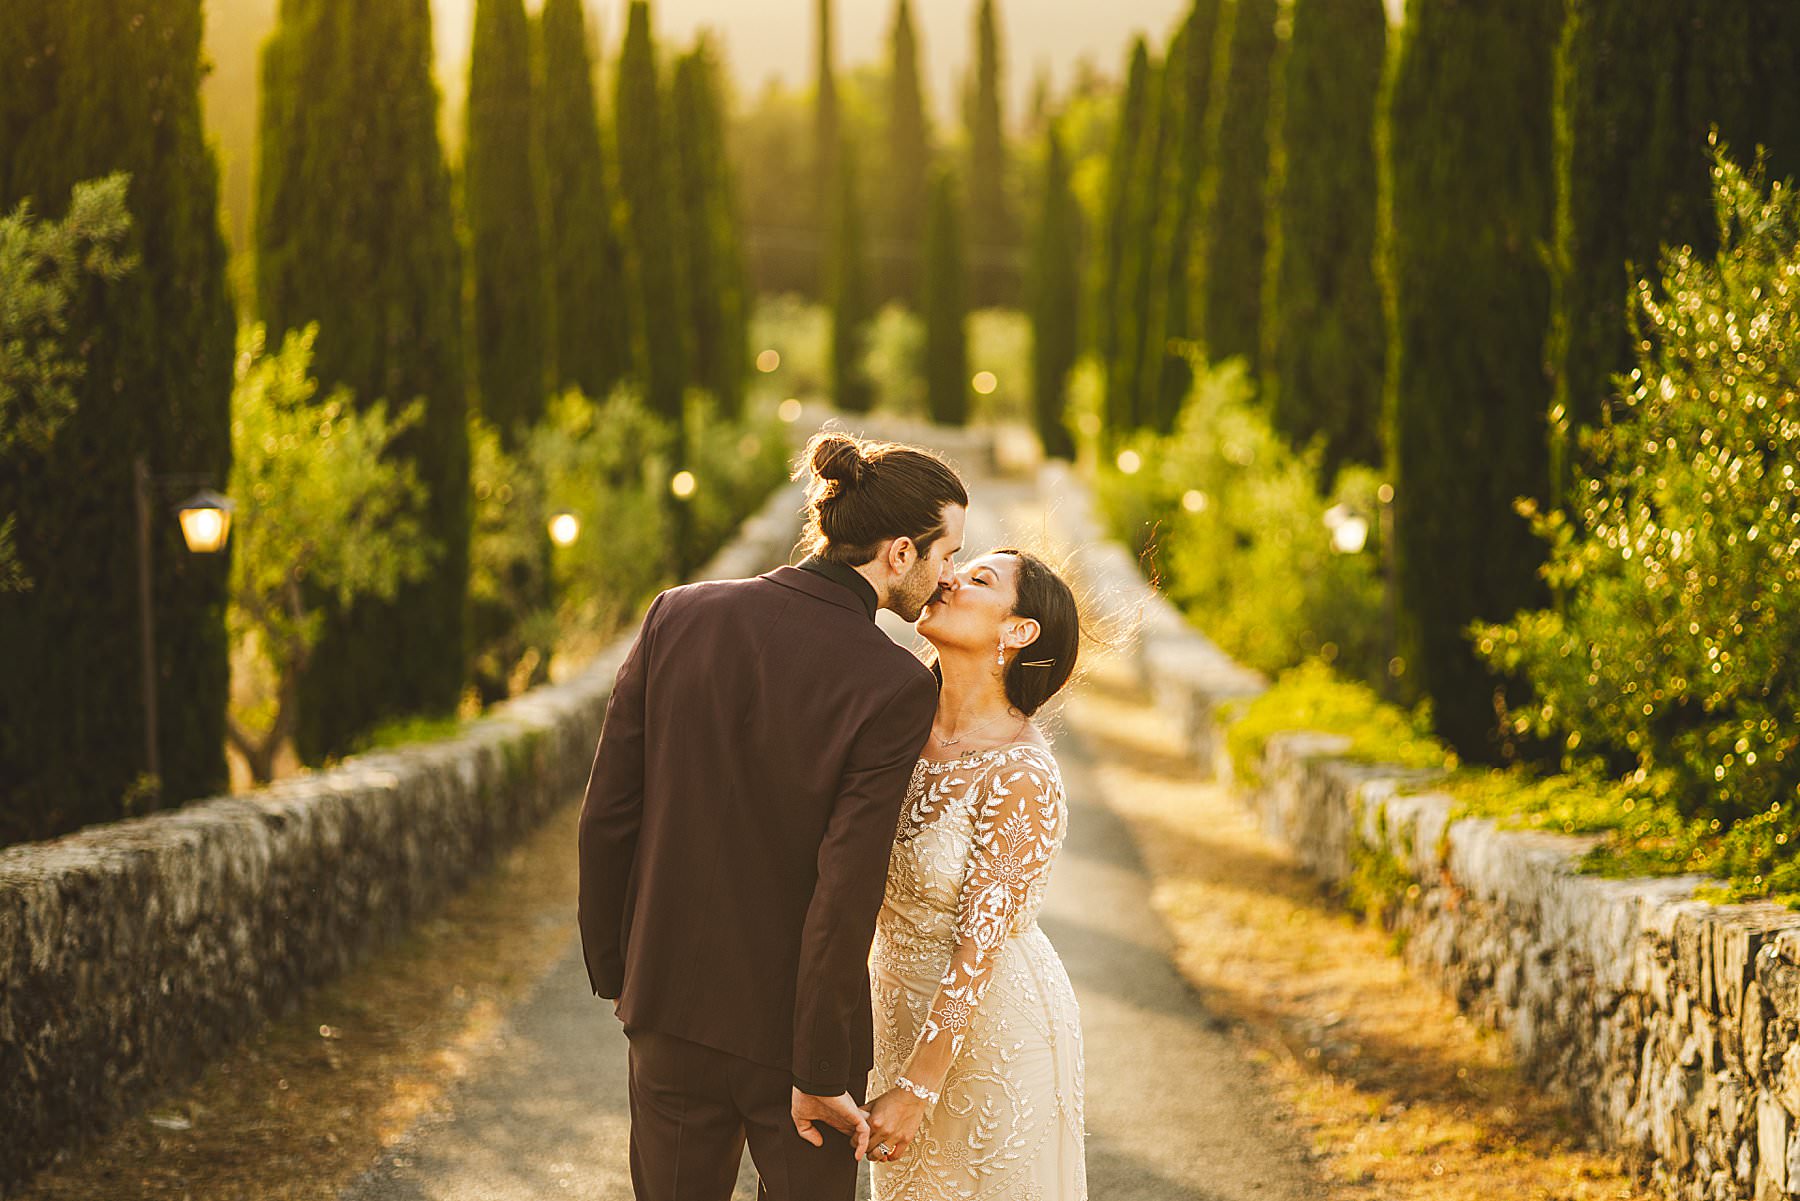 Unforgettable elopement photos at Meleto Castle in Chianti, Tuscany during golden hour